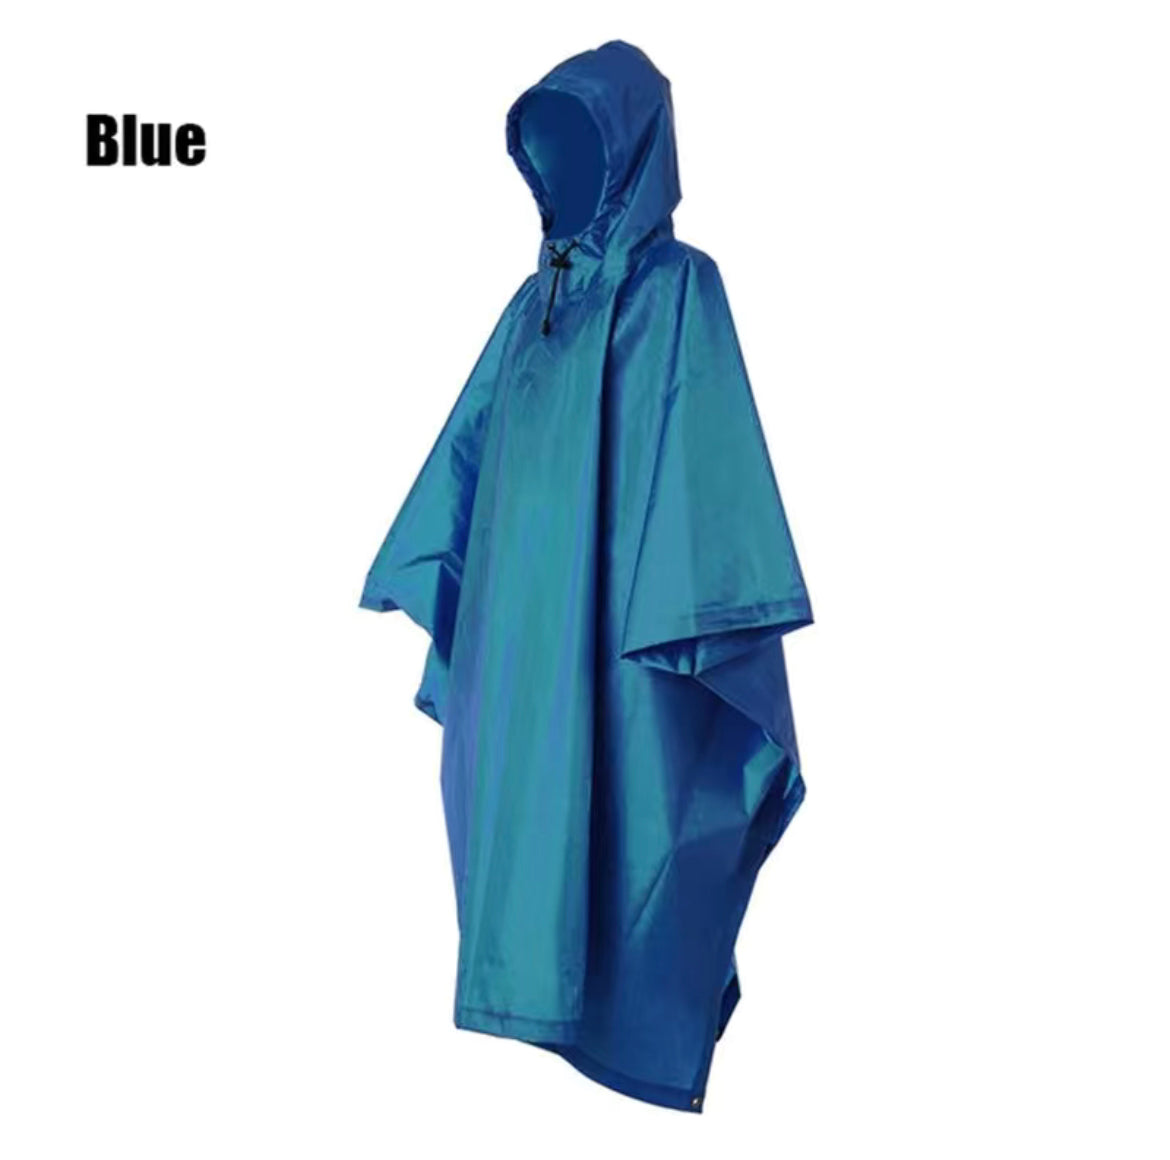 On Sale - Water Resistant Rain Poncho with carrying bag